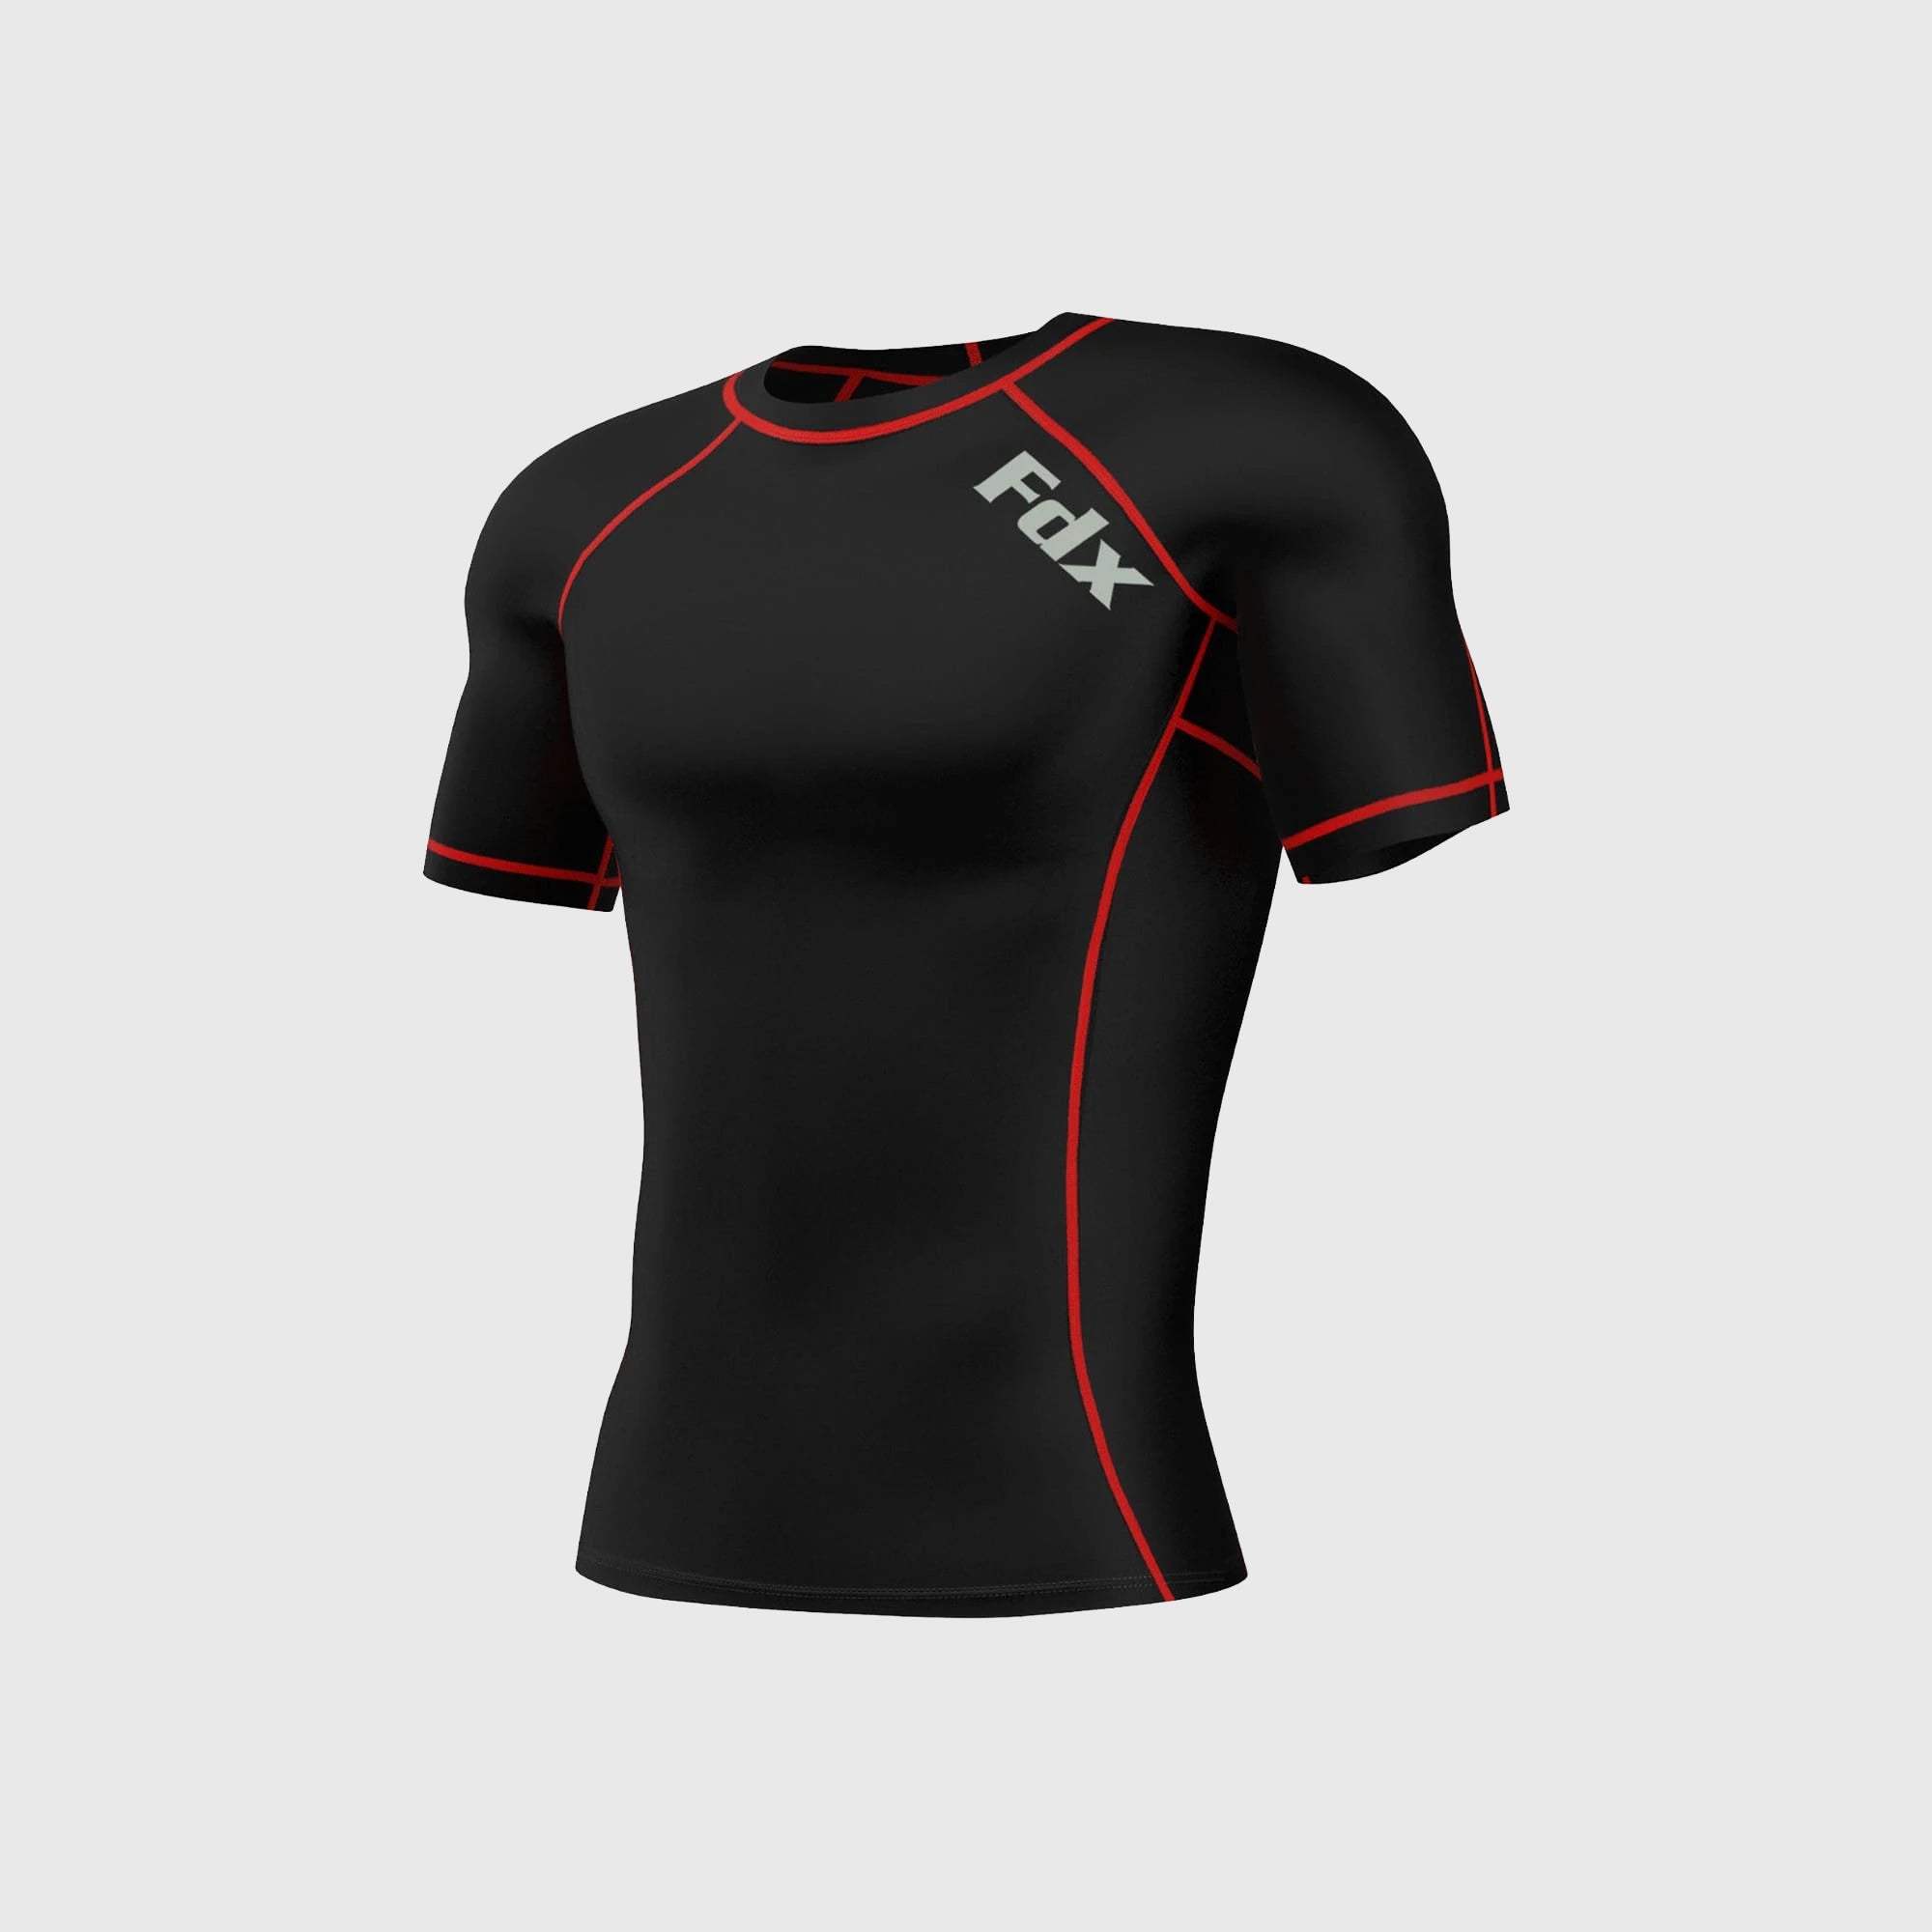 Fdx Mens Black & Red Short Sleeve Compression Top Running Gym Workout Wear Rash Guard Stretchable Breathable - Cosmic